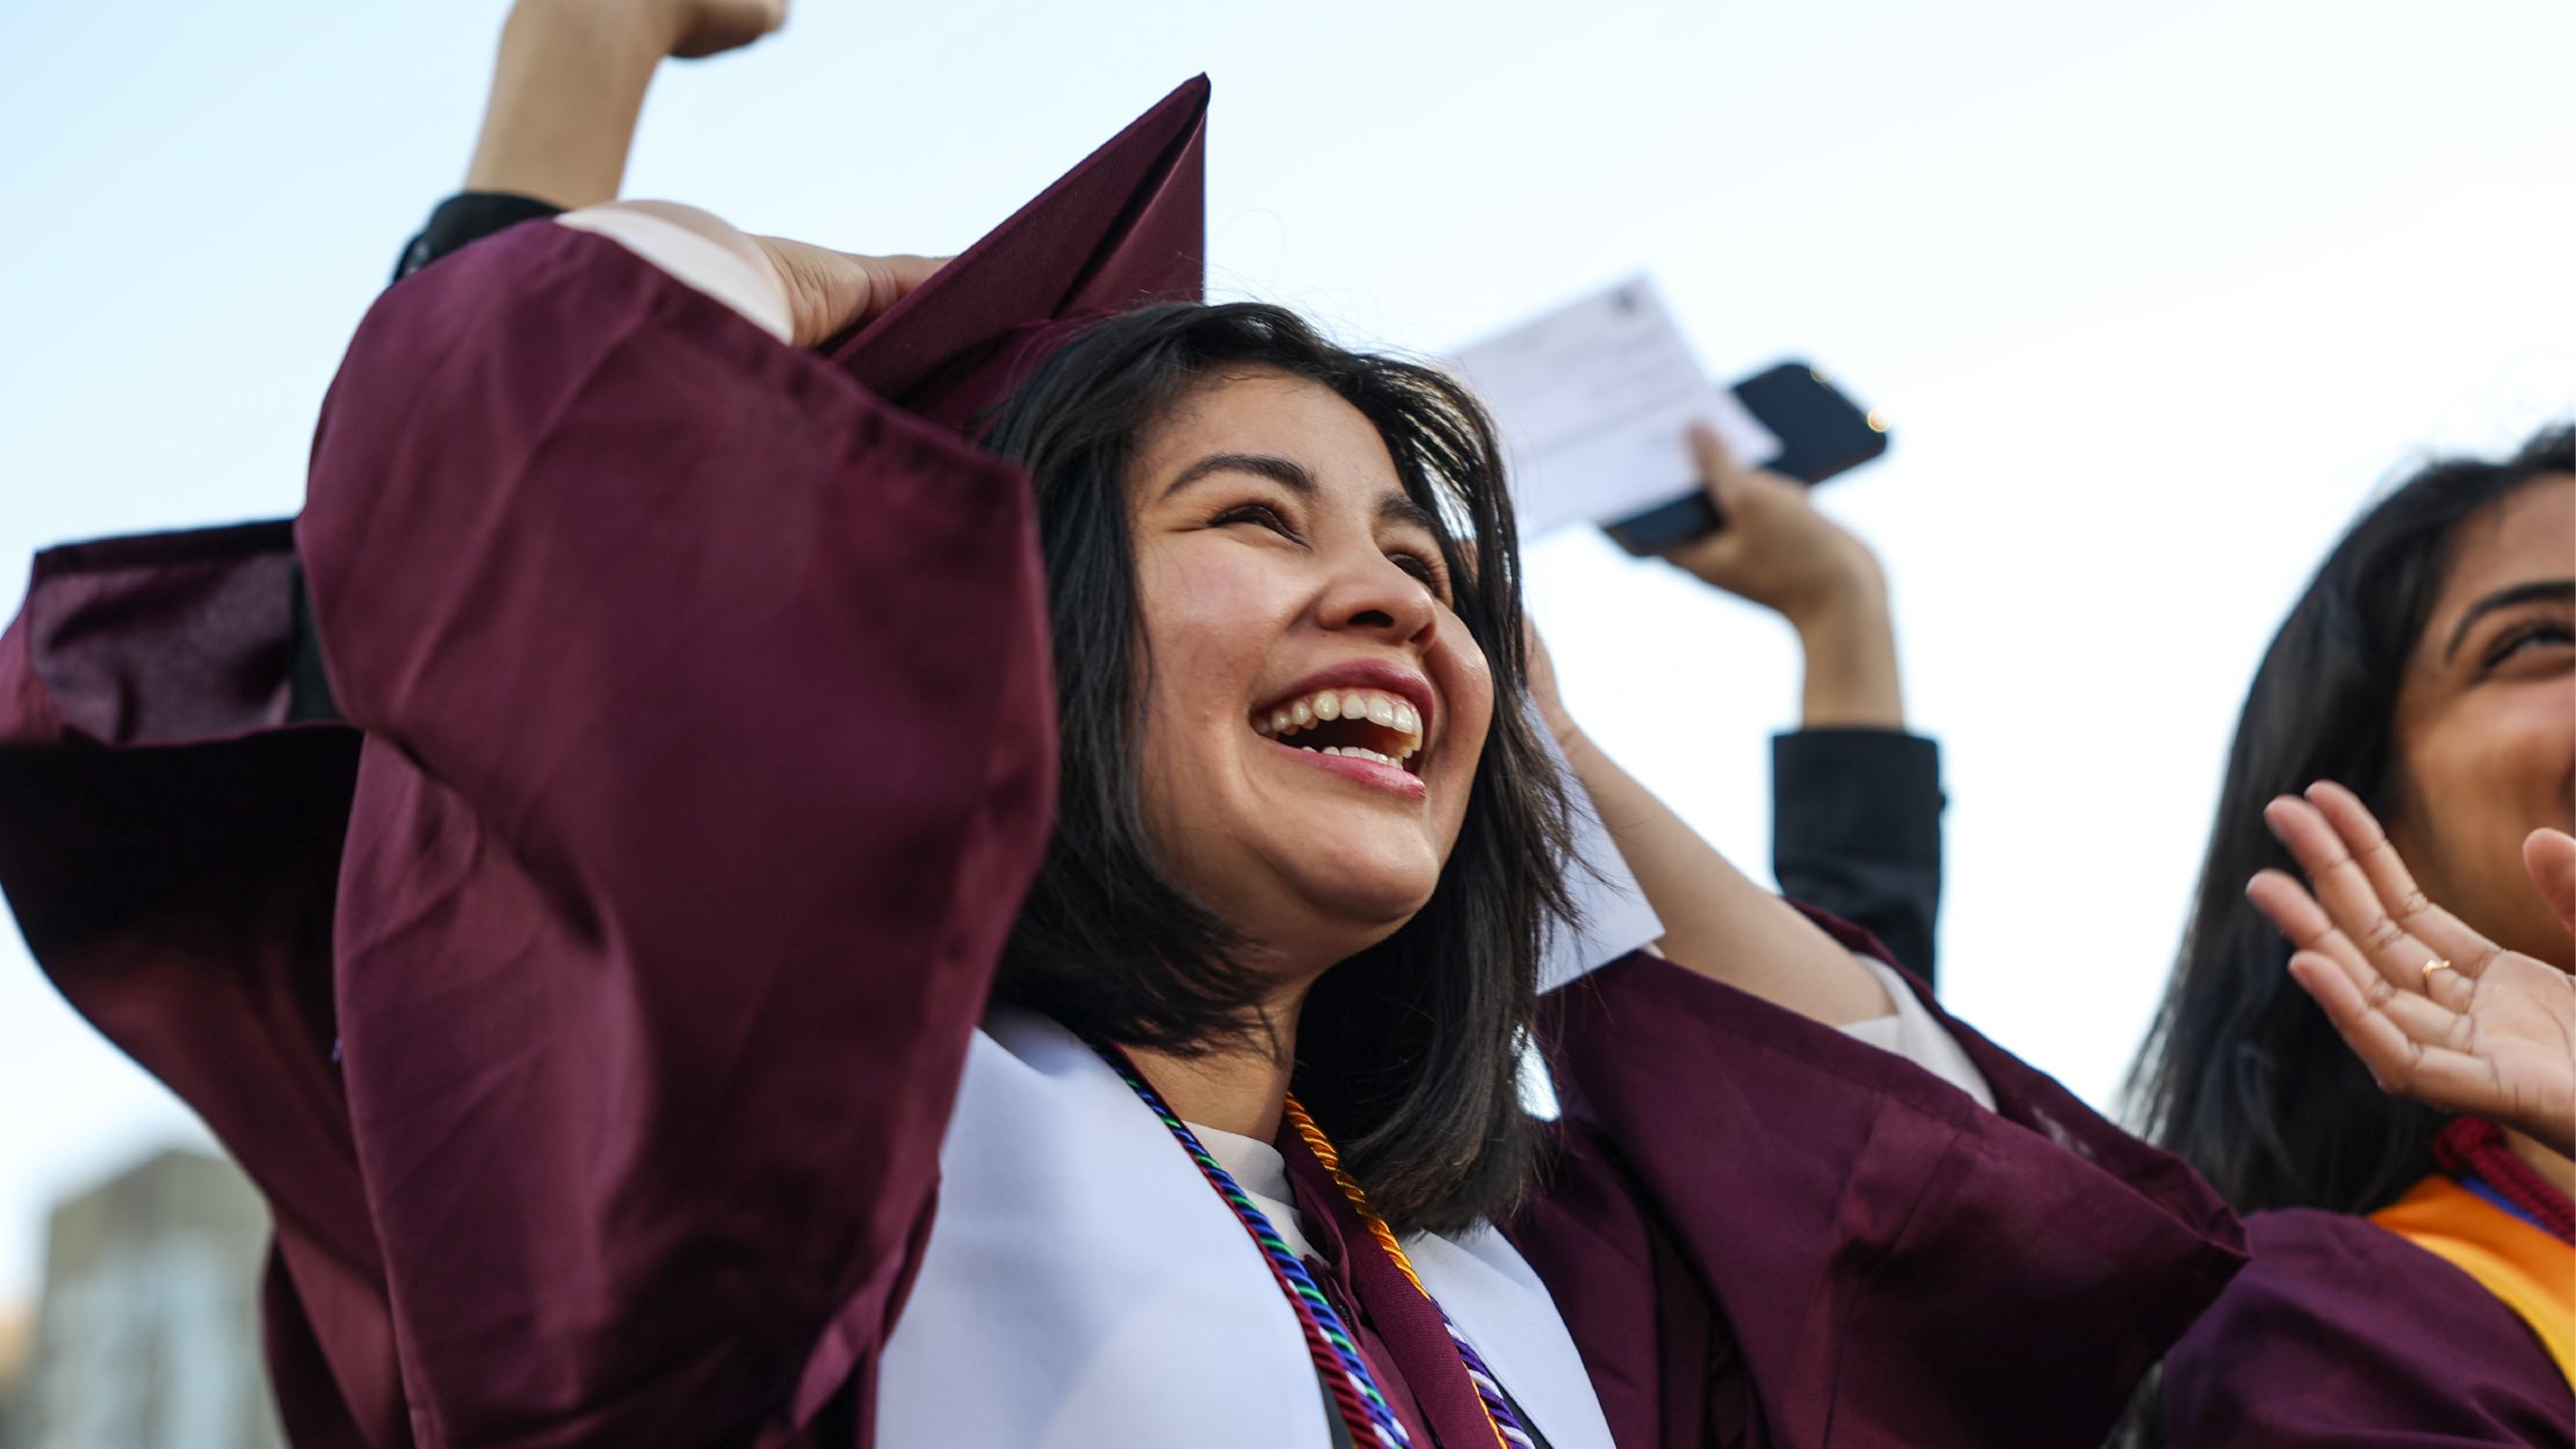 An ASU Graduate cheering during the ceremony